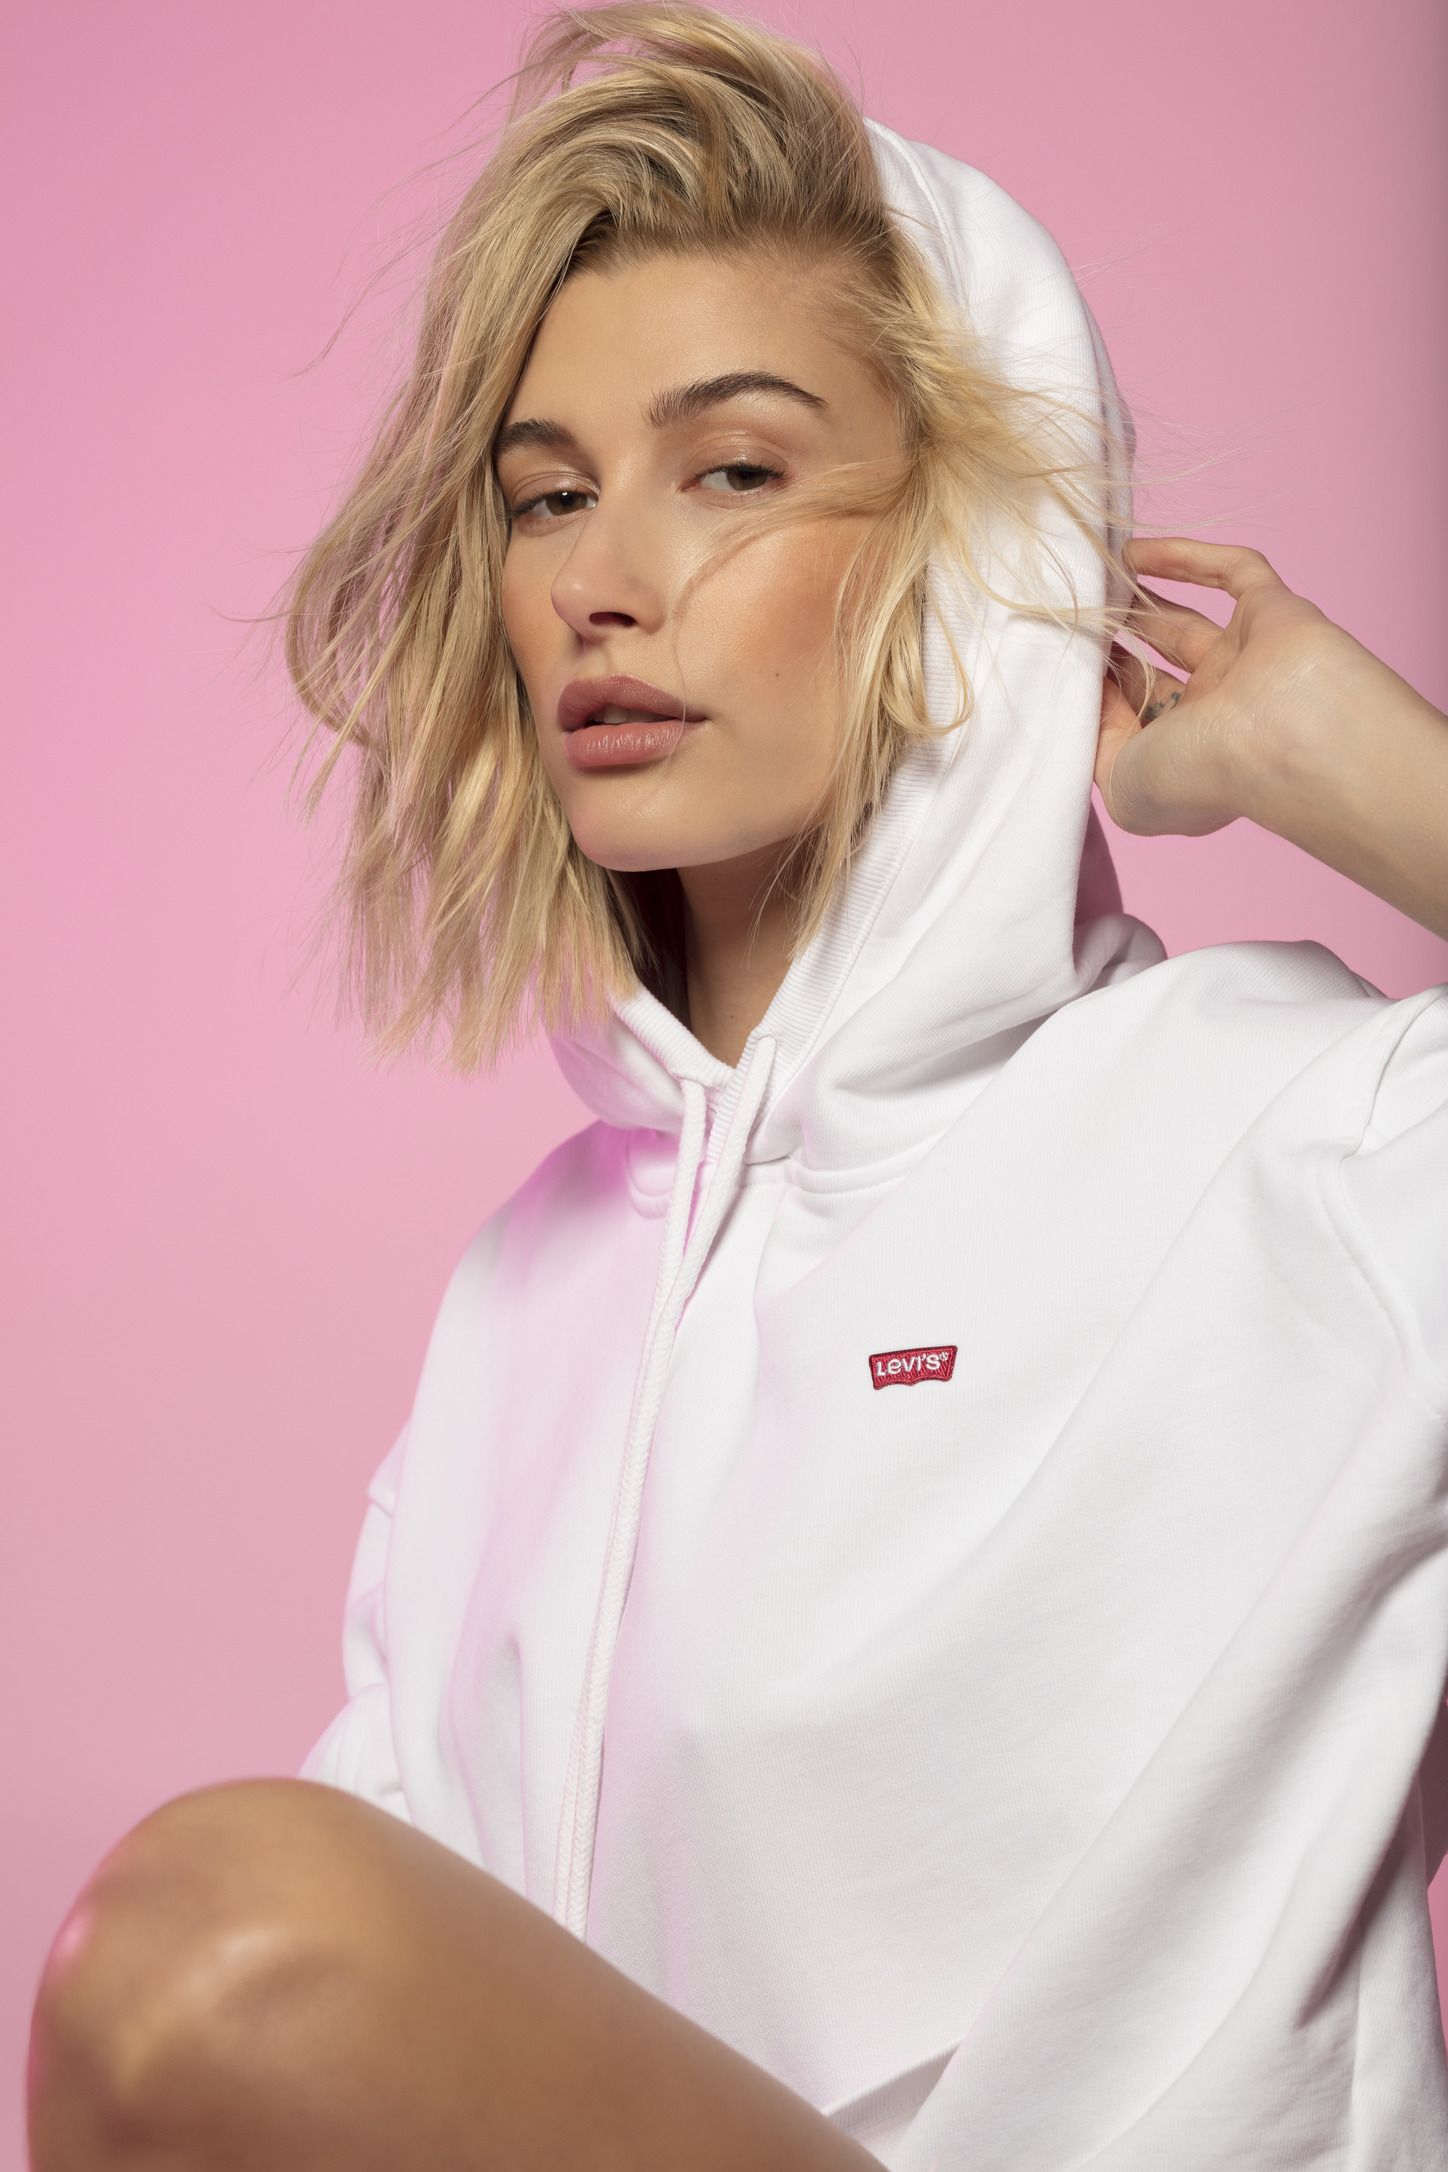 Hailey Baldwin Is the New Face of Levi 